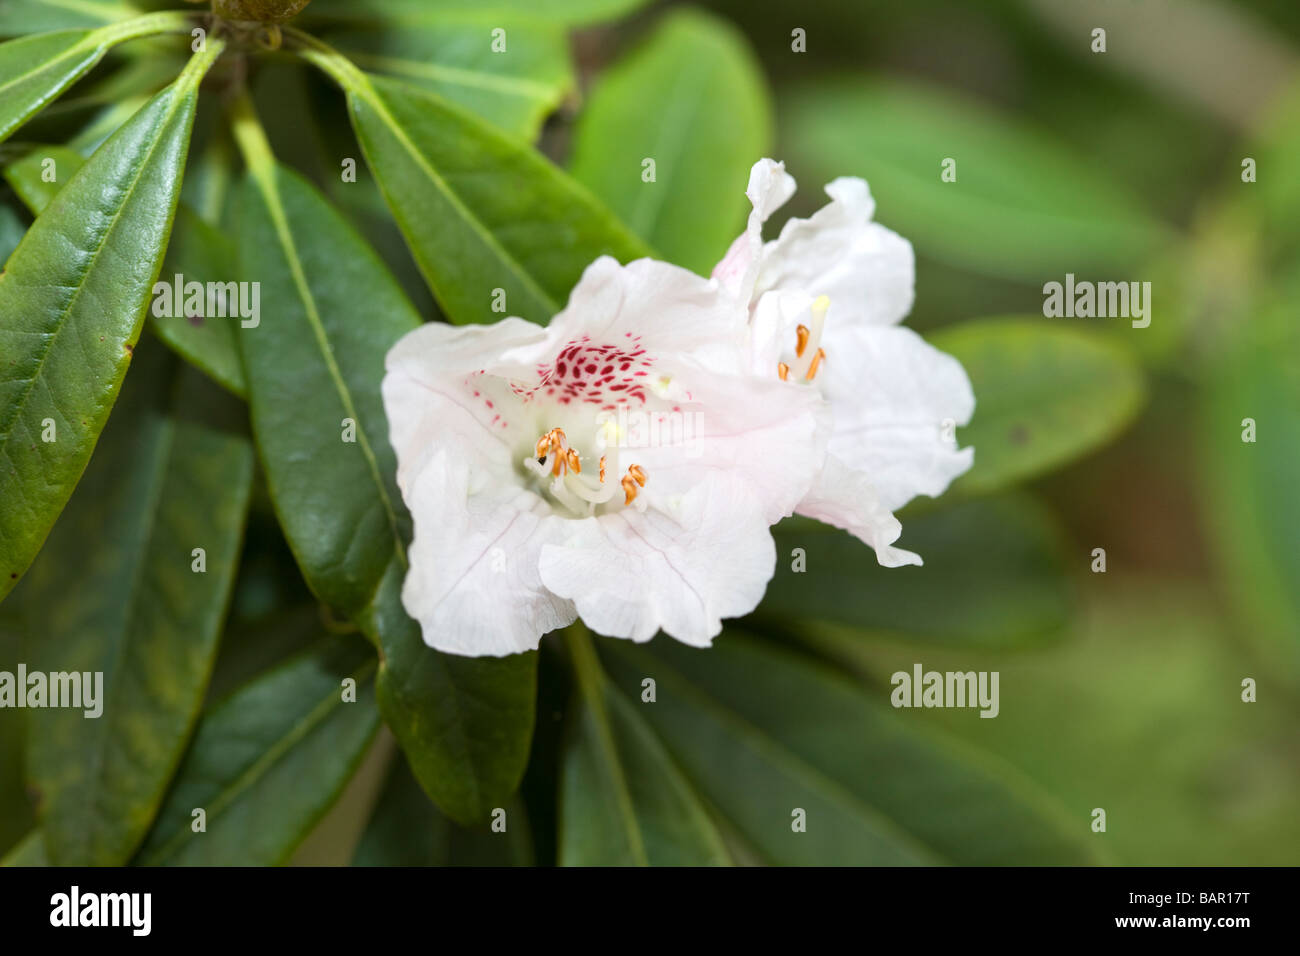 Espèces Rhododendron, Rosettrododendron hunnewellianum (Rhododendron) Banque D'Images